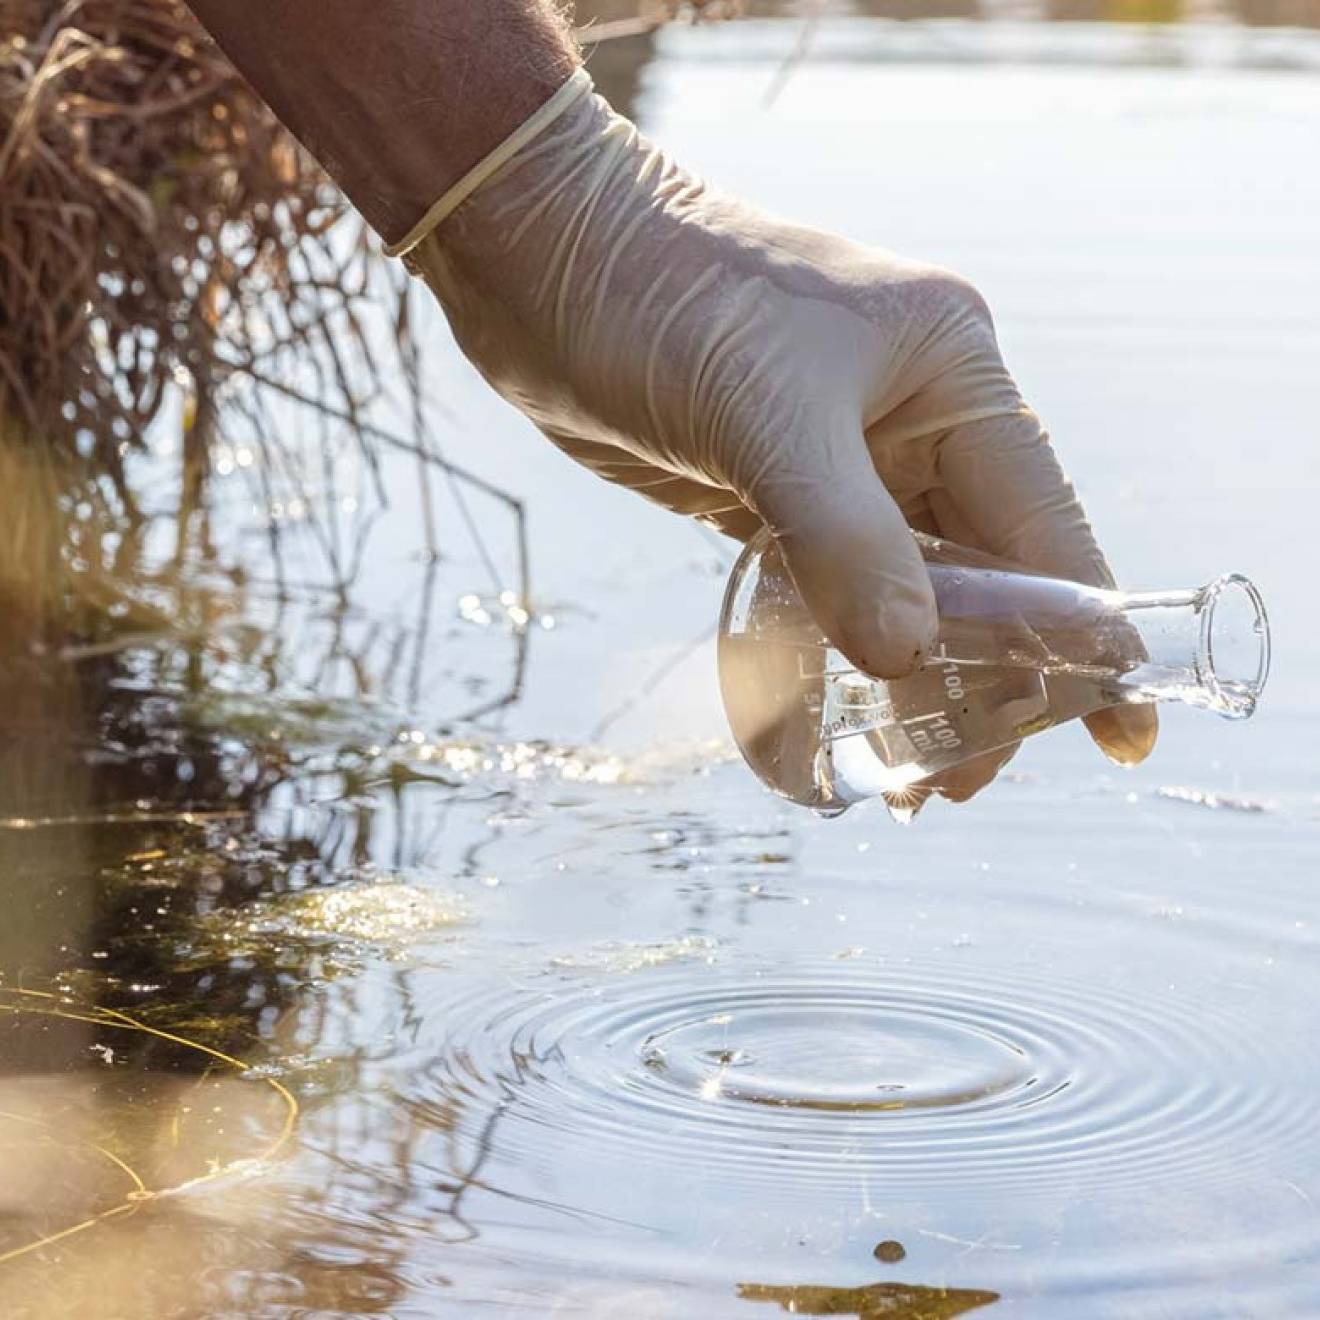 A gloved hand collecting water outside